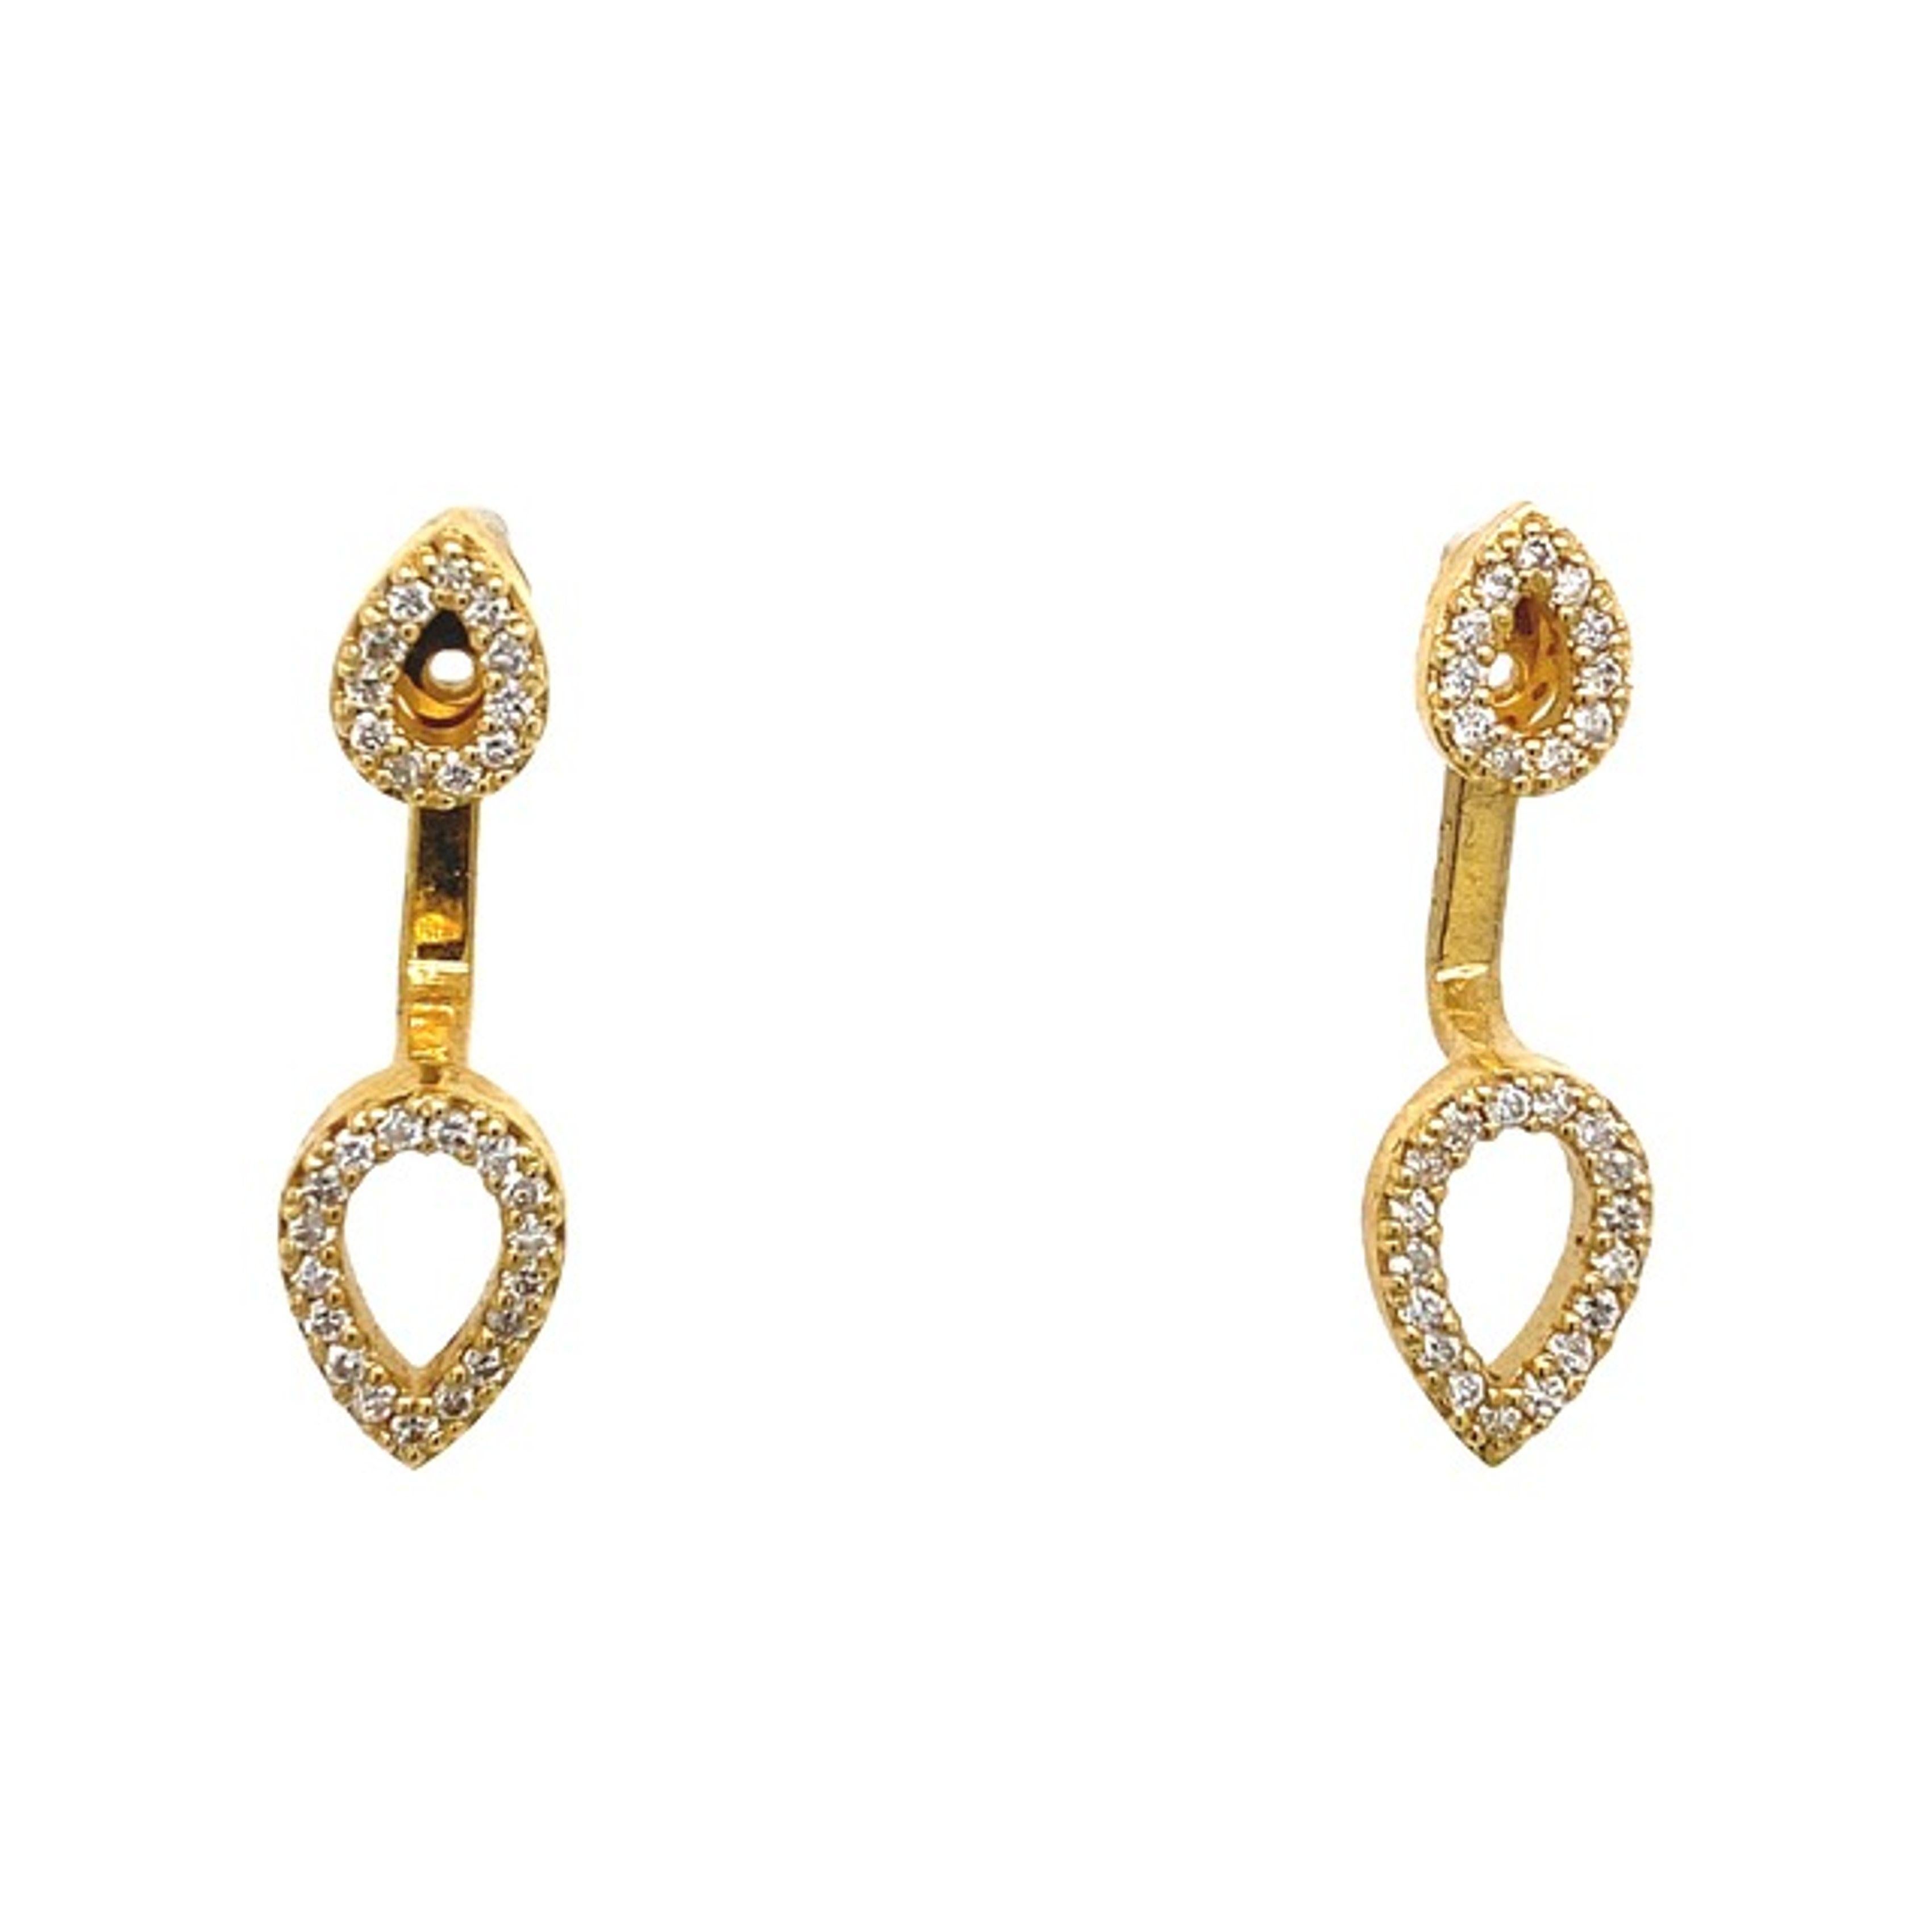 New Fine Quality Drops & Studs Earrings Set with Diamonds in 18ct Yellow Gold In New Condition For Sale In London, GB